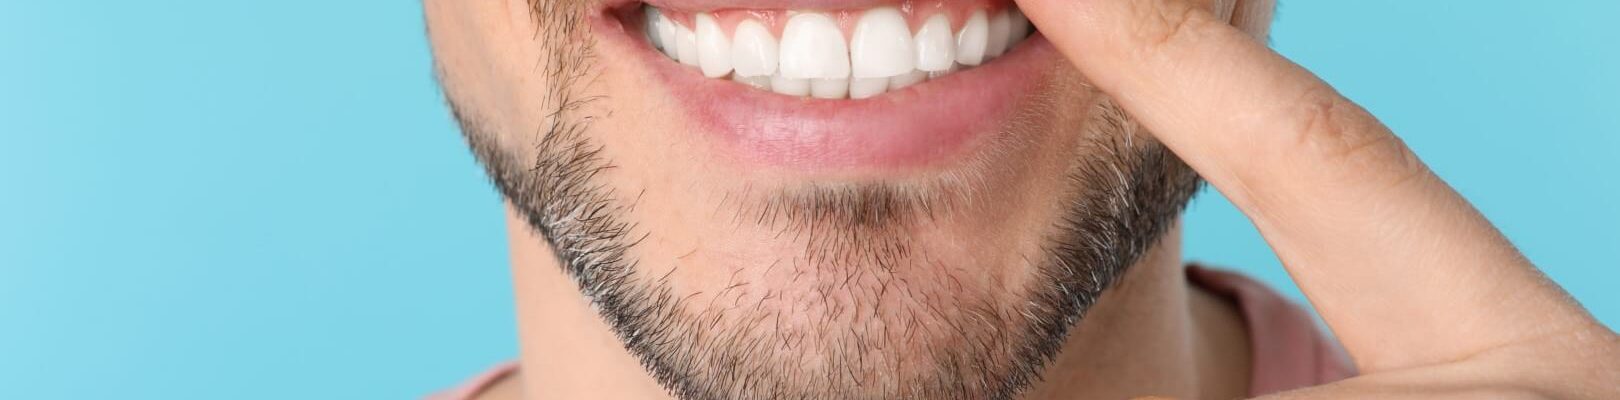 how-to-strengthen-enamel-scaled-minified